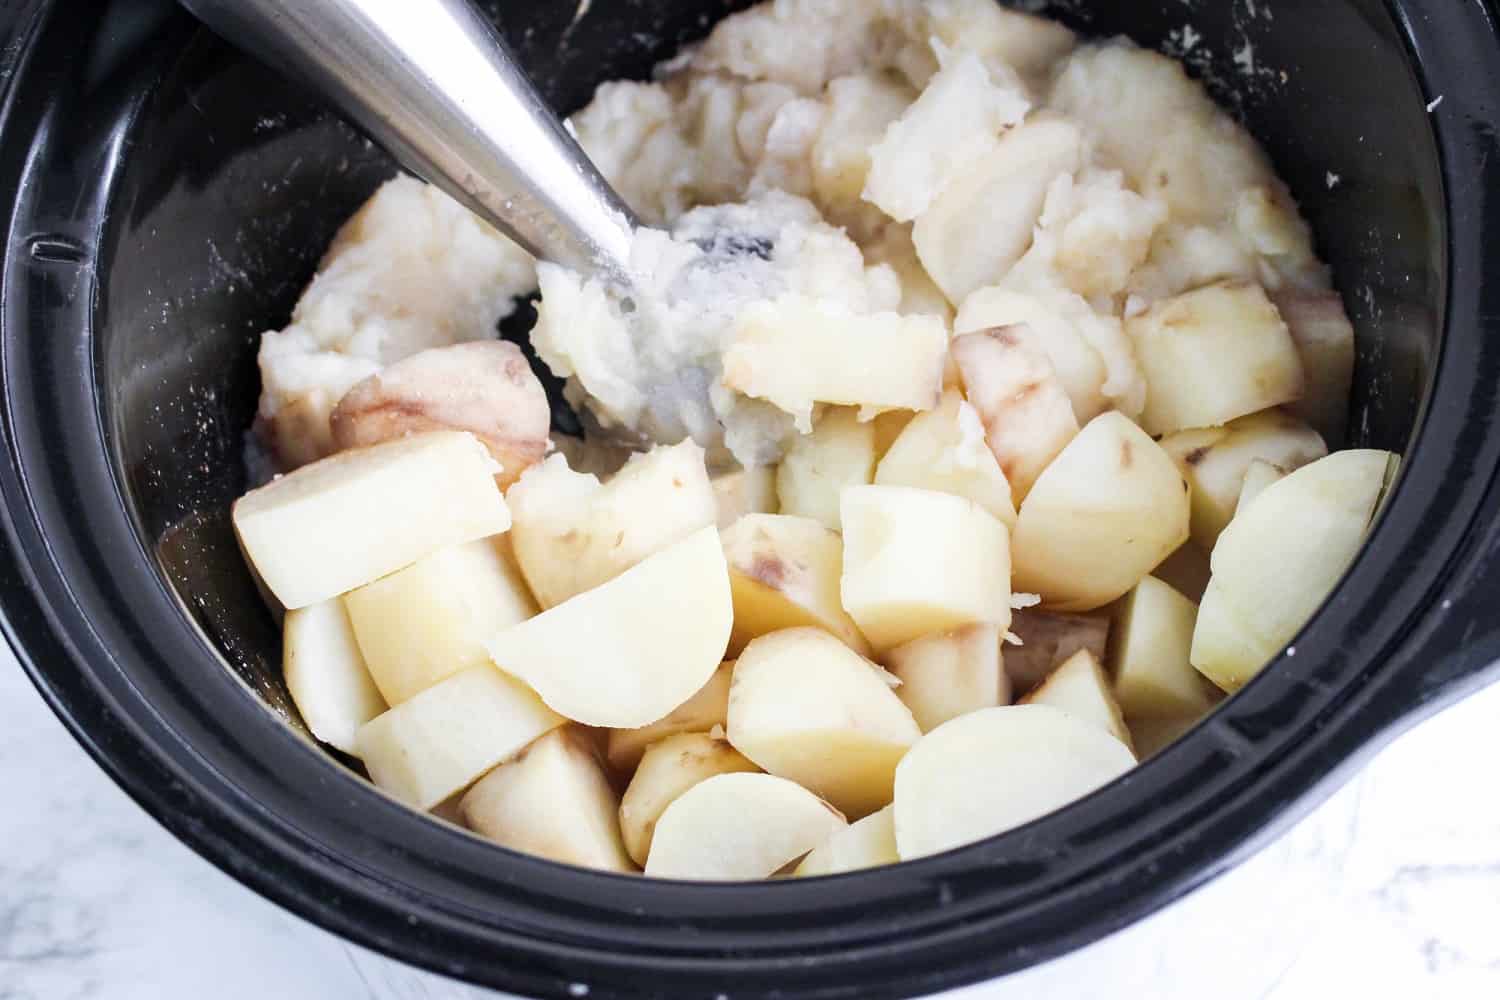 mash potatoes in slow cooker